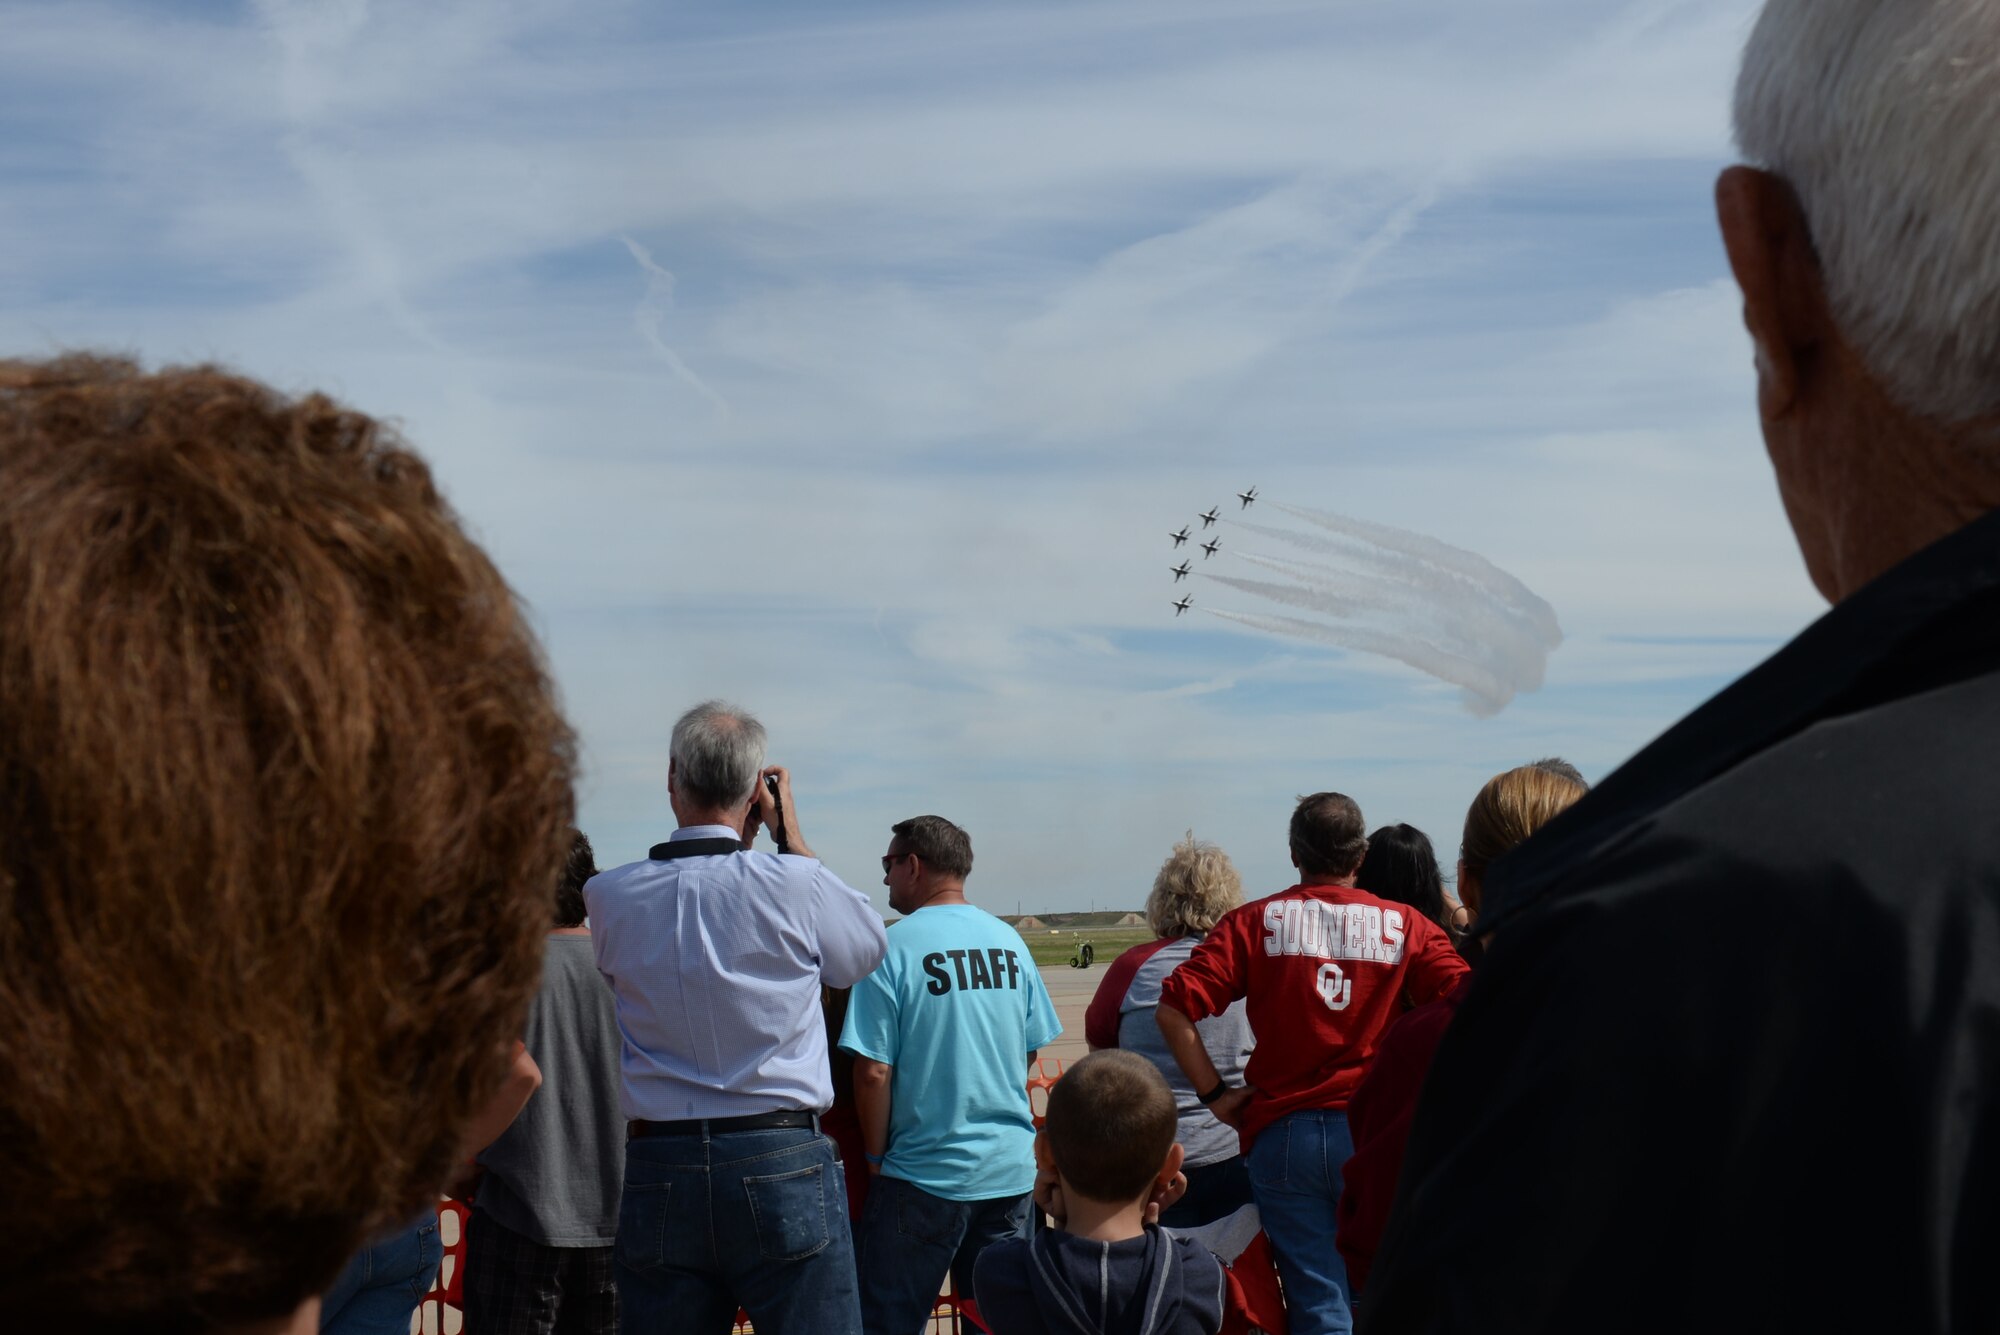 ALTUS AIR FORCE BASE, Okla. – Spectators watch as the U.S. Air Force Thunderbirds fly in a delta formation during the 2014 Wings of Freedom Open House Sept. 13, 2014. The U.S. Air Force Air Demonstration Squadron, better known as the Thunderbirds, performs precision aerial maneuvers demonstrating the capabilities of Air Force high performance aircraft to people throughout the world. The squadron exhibits the professional qualities the Air Force develops in the people who fly, maintain and support these aircraft. (U.S. Air Force Airman 1st Class J. Zuriel Lee/Released)